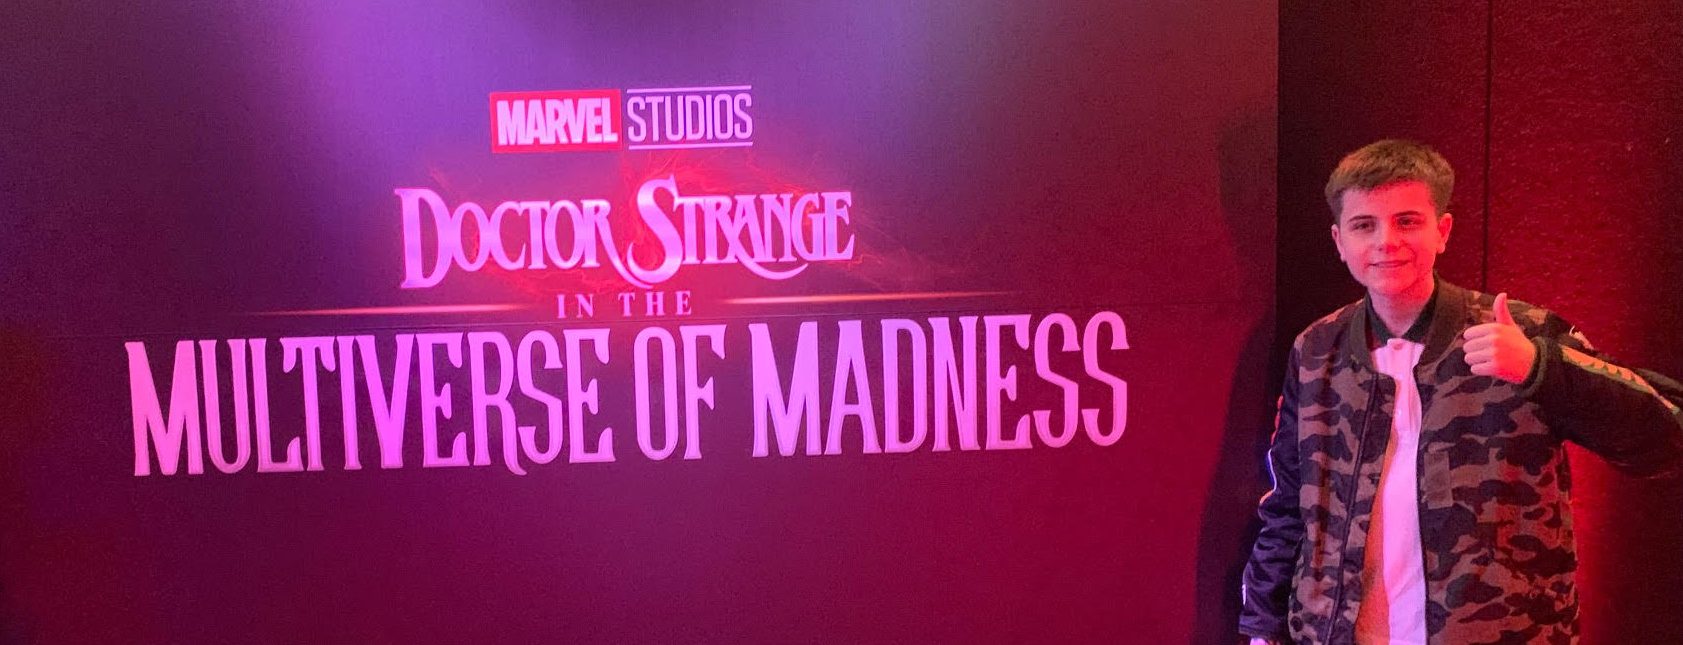 Marvel – Doctor Strange in the Multiverse of Madness